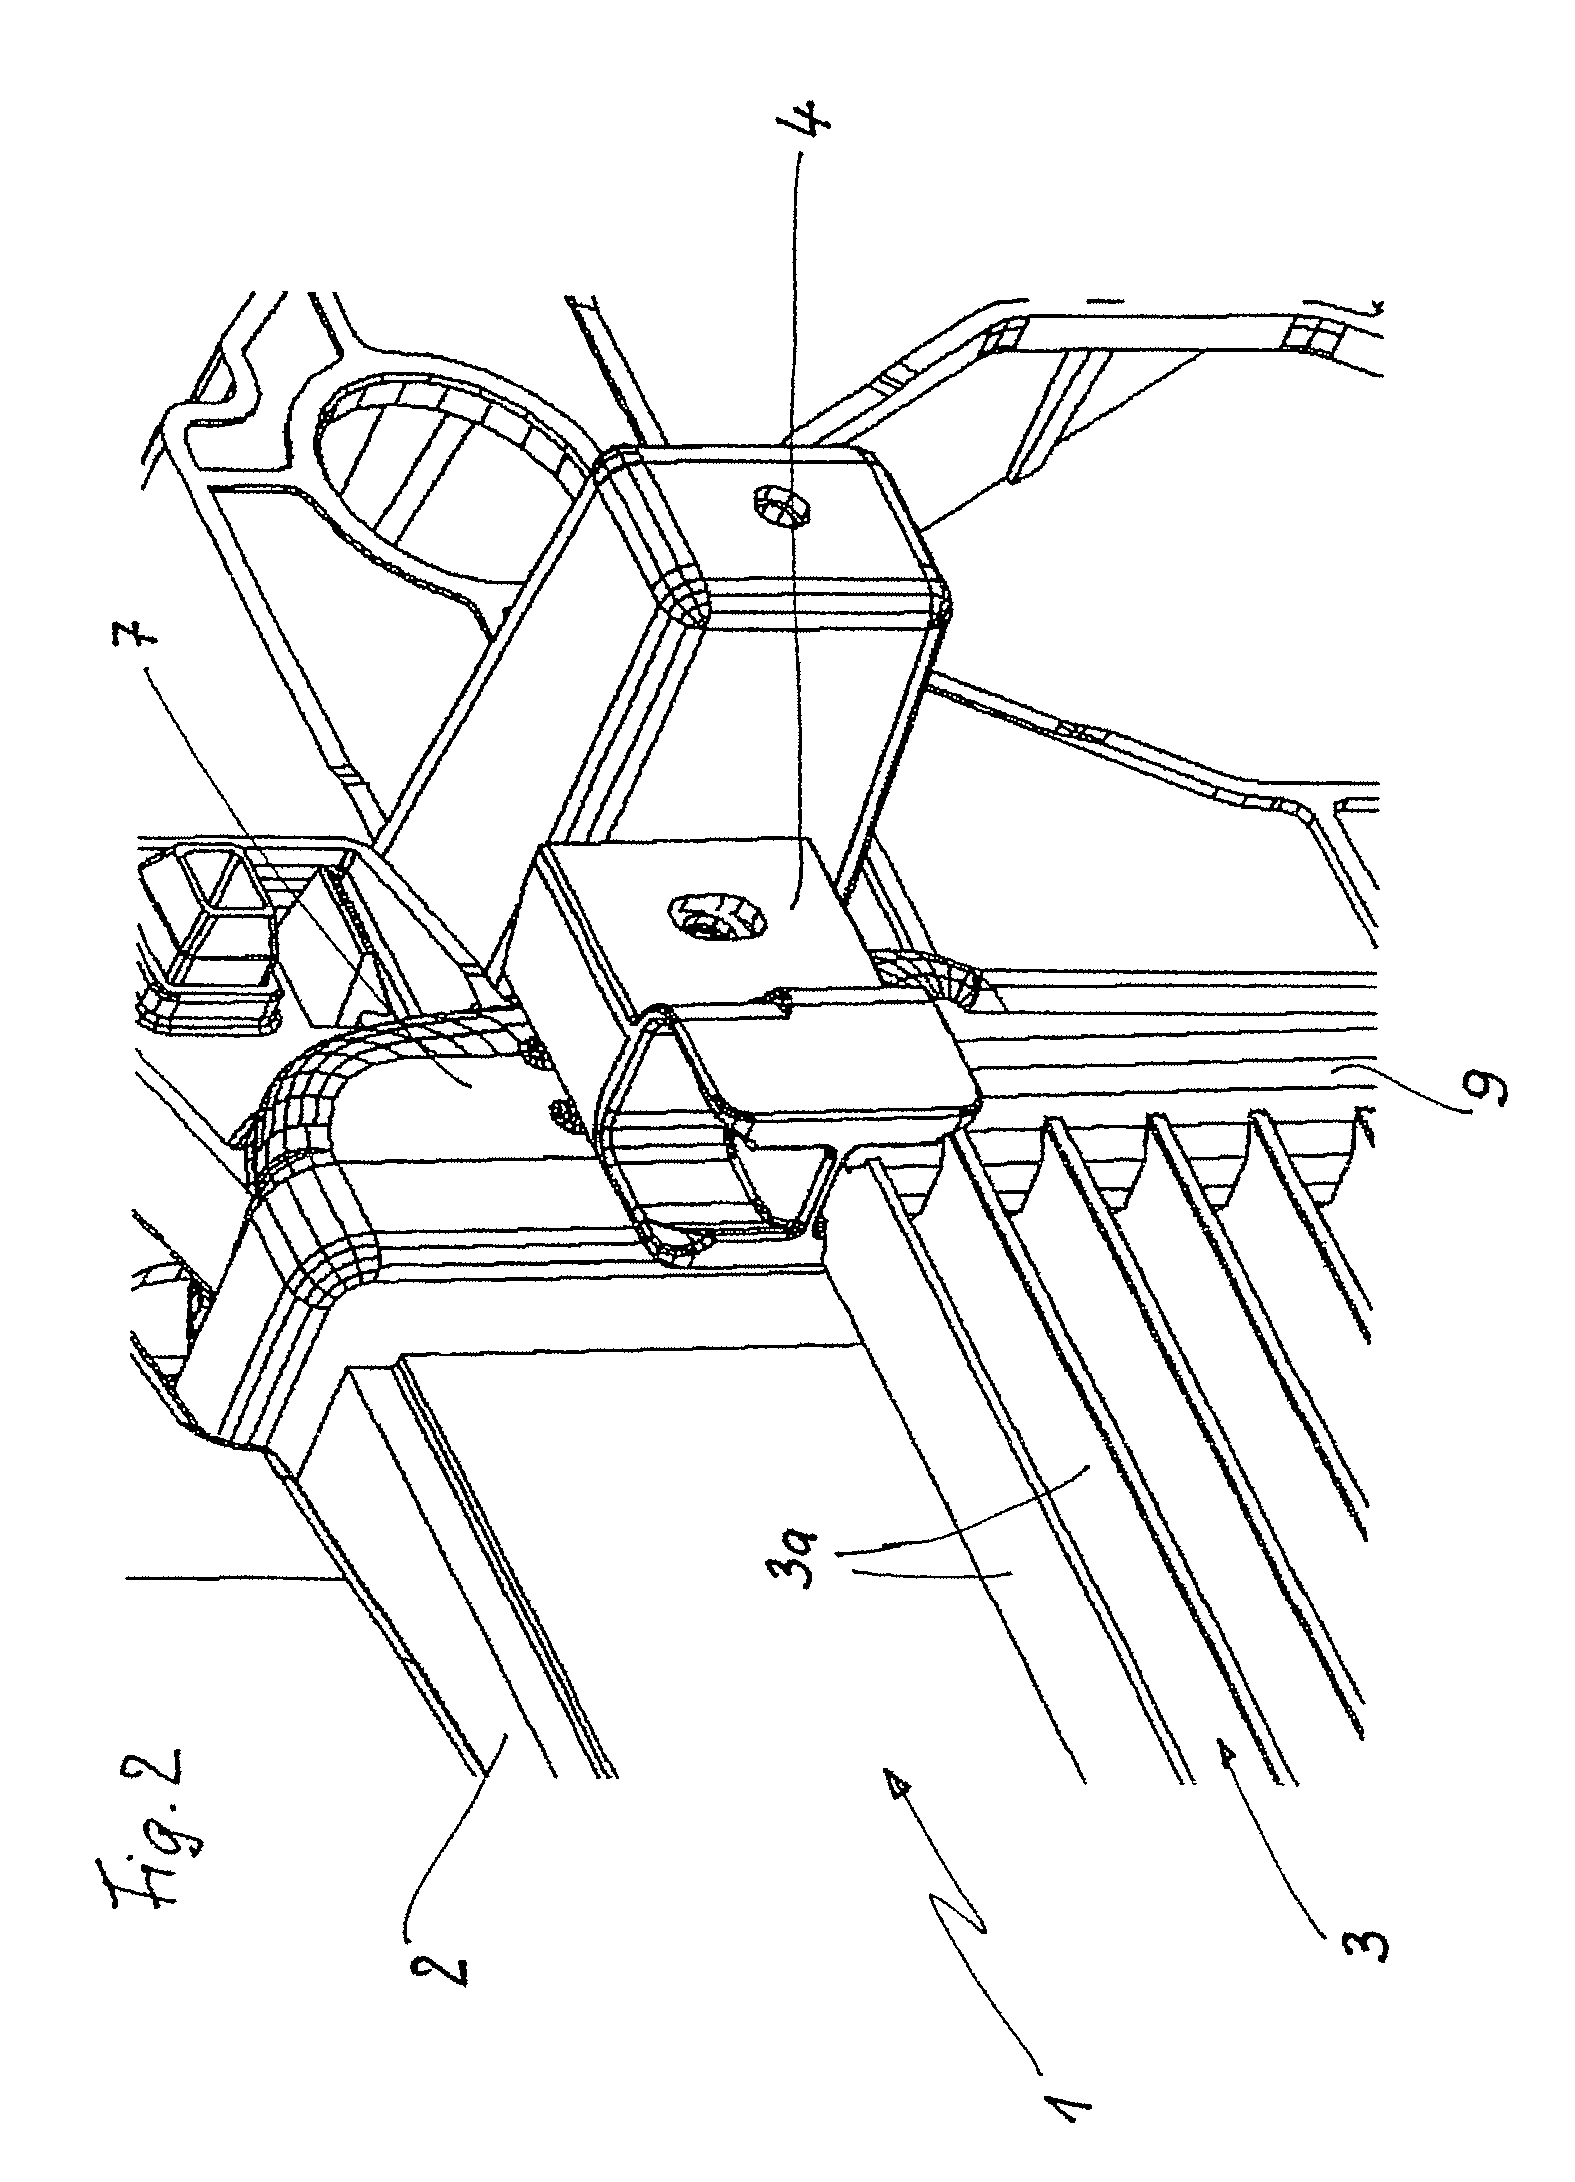 Fastening and joining element for heat exchangers, and heat exchanger assembly in a motor vehicle